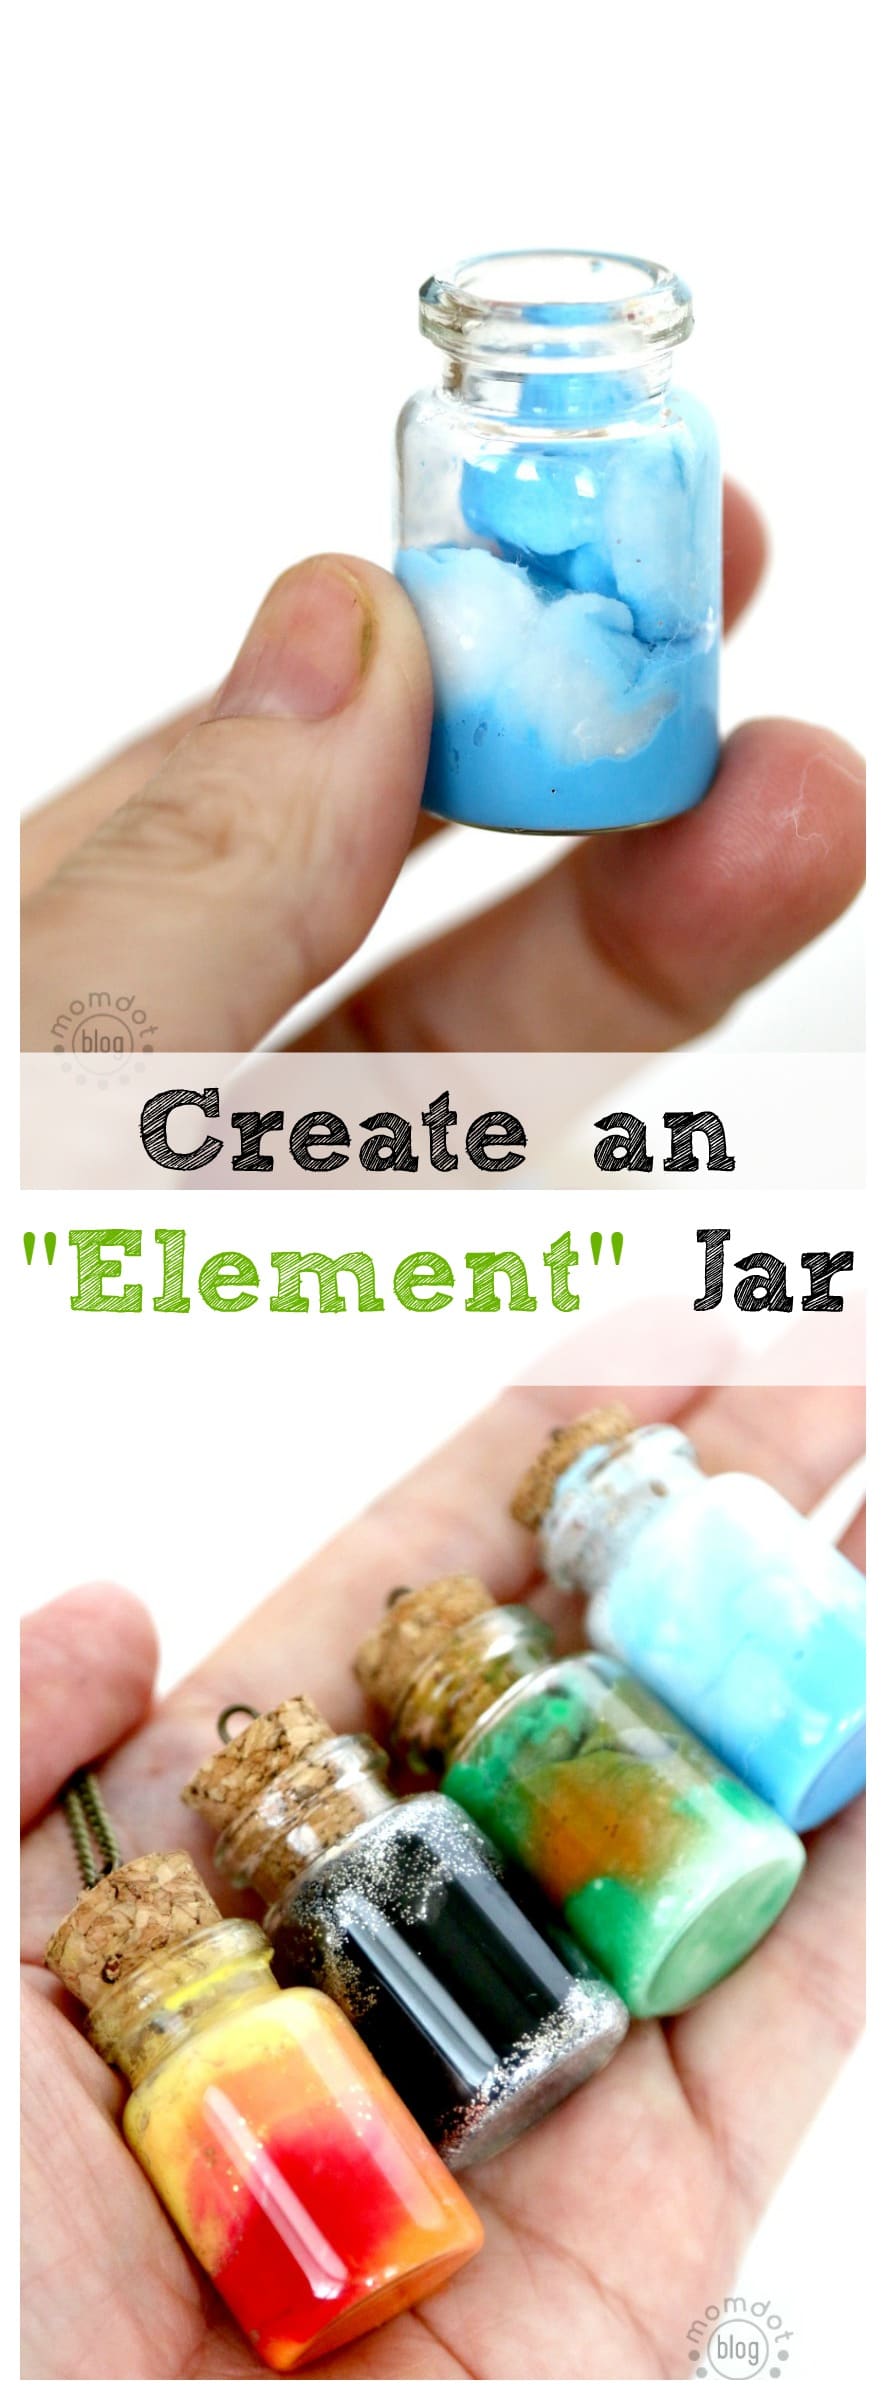 Element Jars: Create Sun, Moon, Earth, and Sky in these fun DIY Element Jar Necklaces Tutorial, picture instructions, Nebula Jar